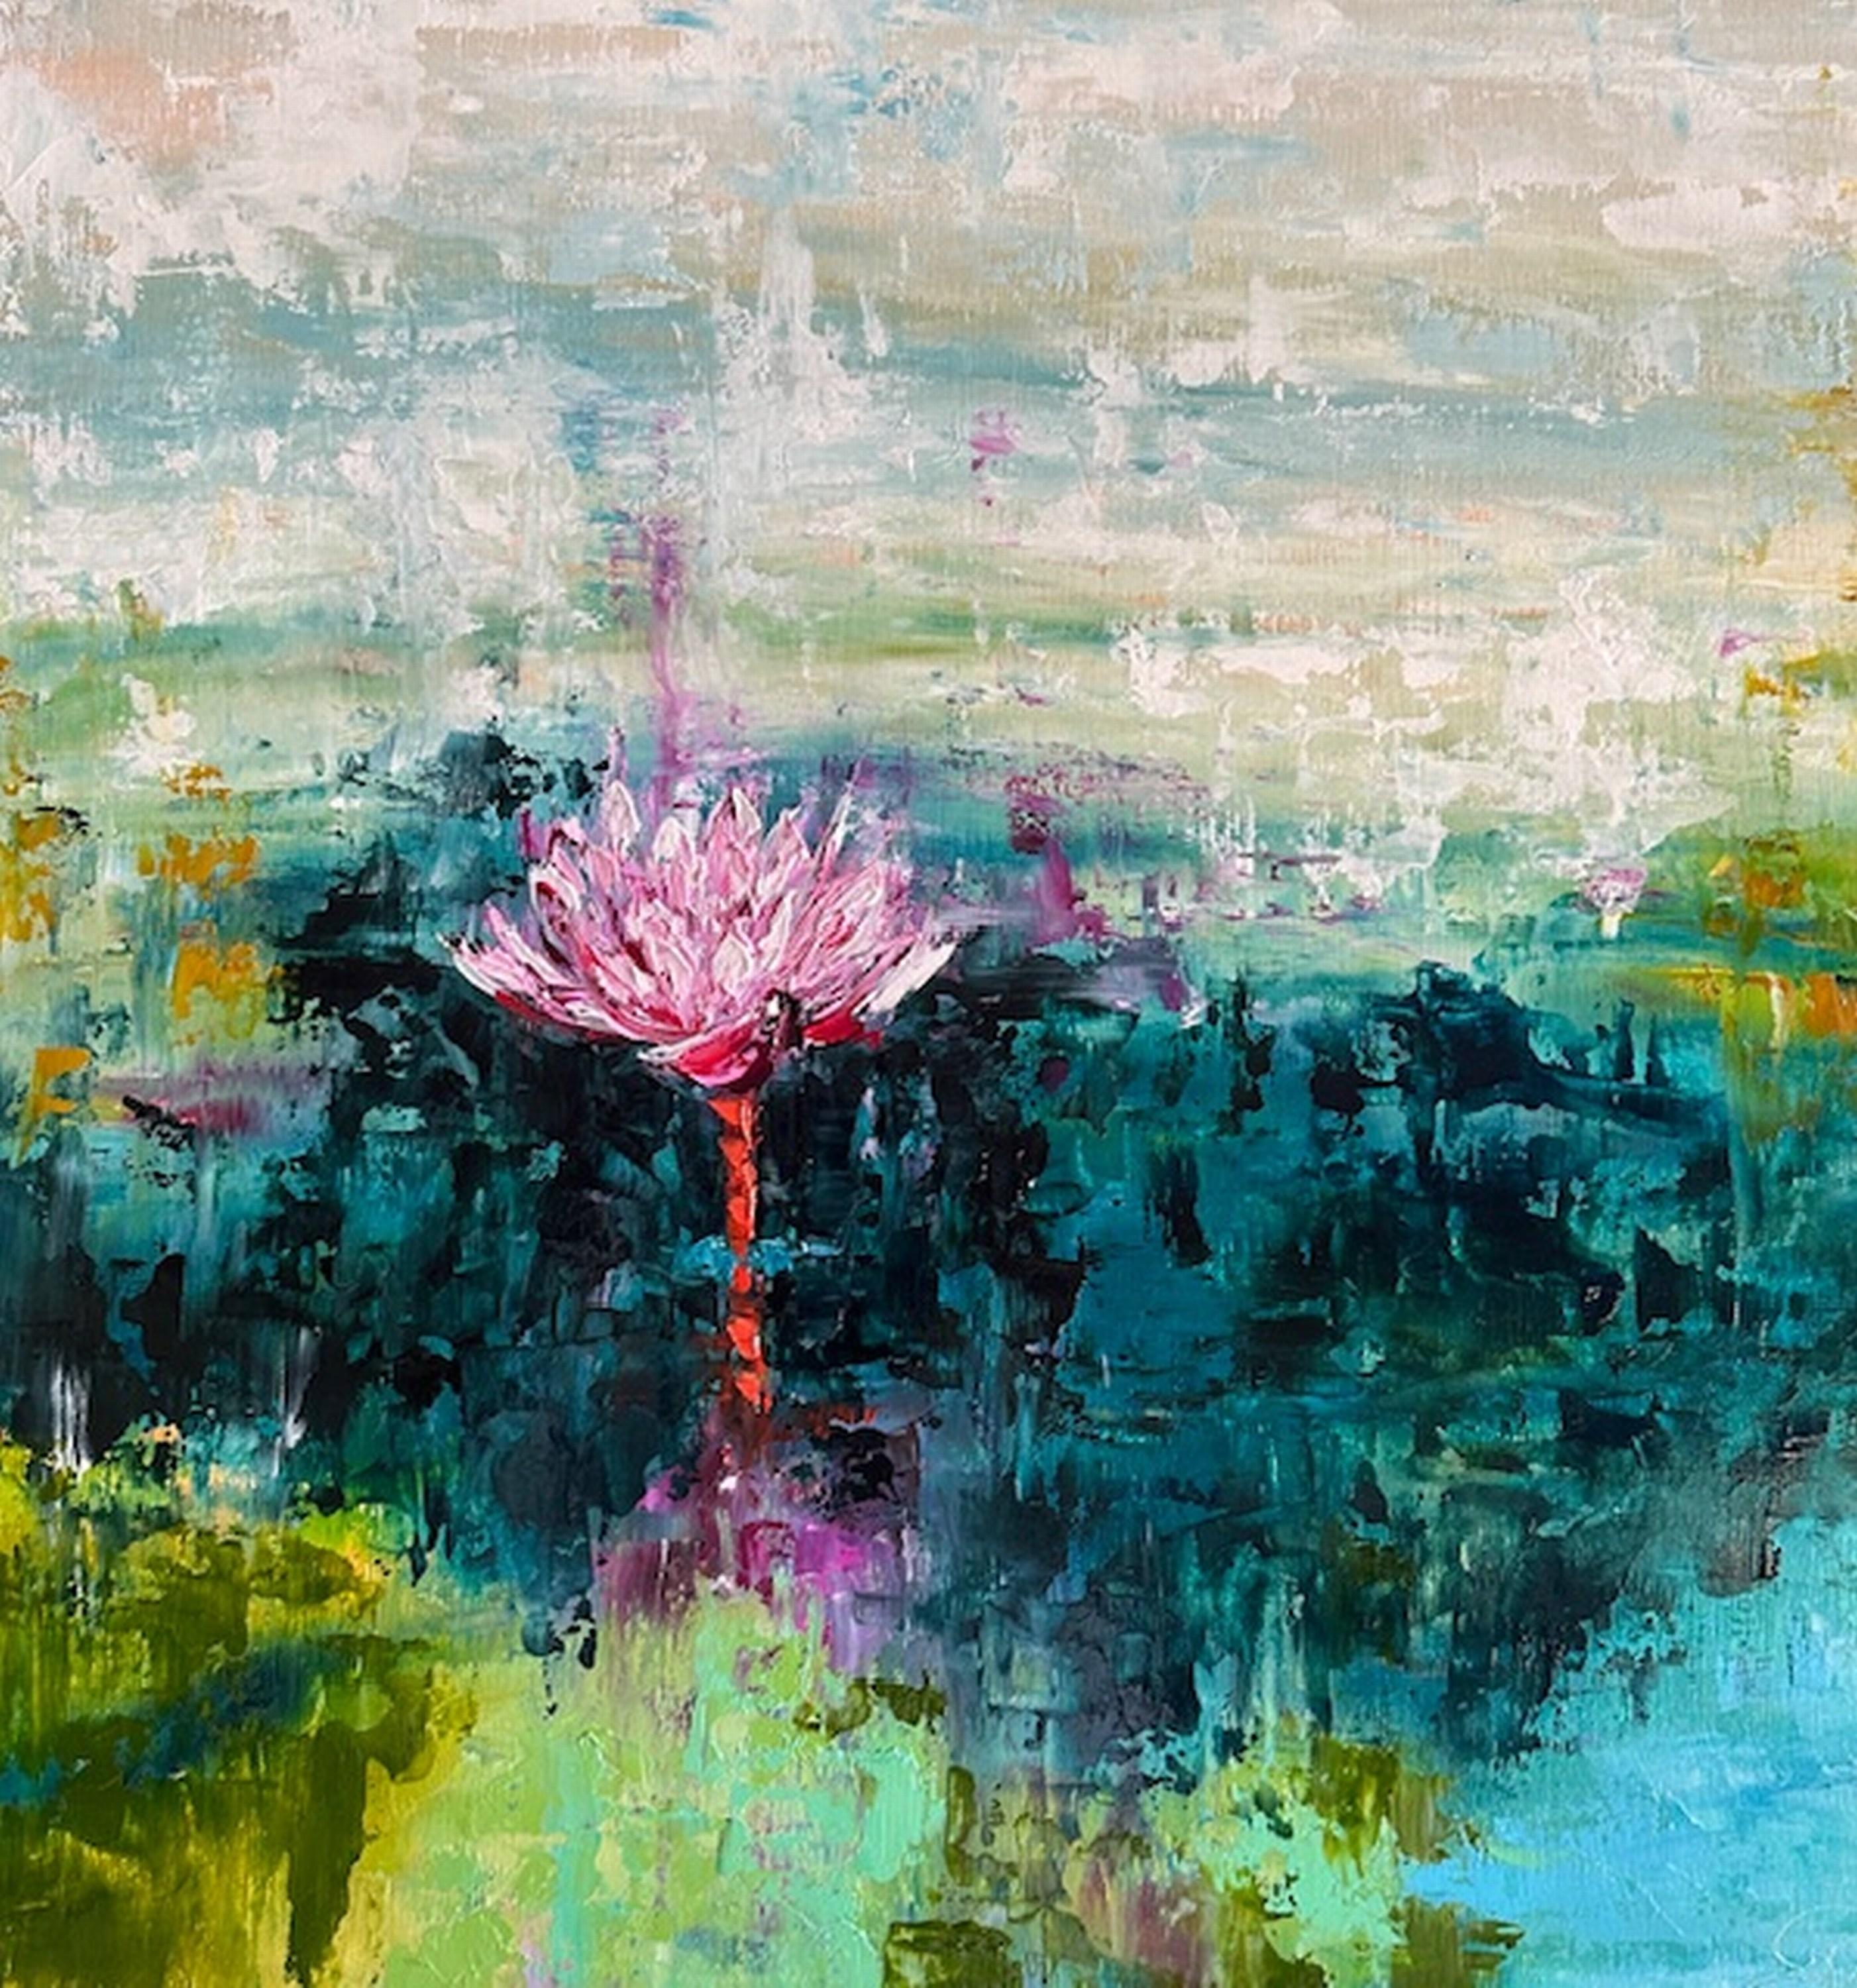 Genevieve Hamel
Reflection
Oil on Wood Panel
Year: 2024
Size: 24 x 24 x 1.625 inches
Signed by hand
COA provided
Ref.: 924802-2095

Thick layers of paint and pigment sticks amplify the movement, depth, and beautiful coloration of the water. The